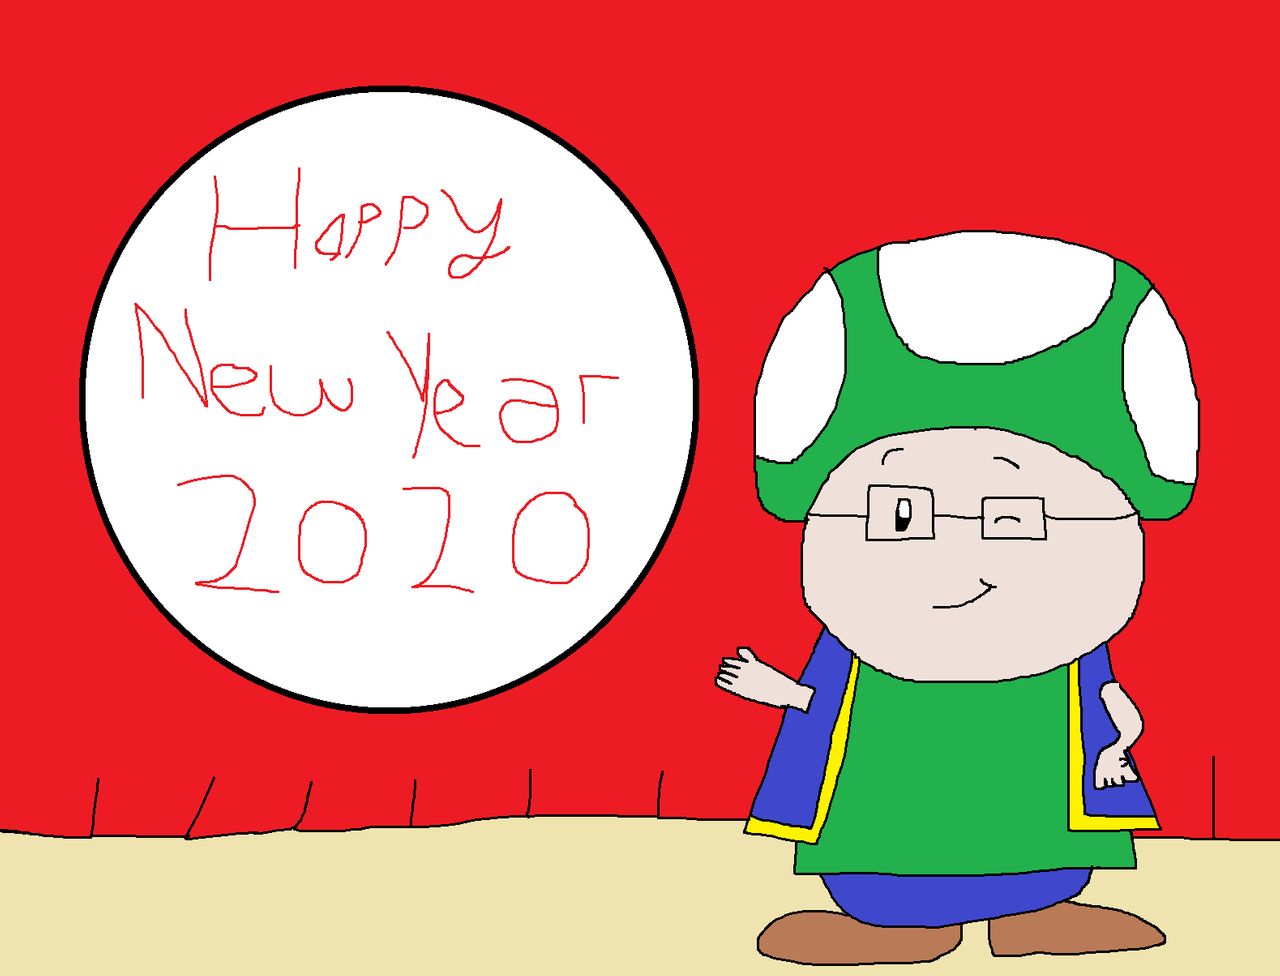 Toadius Wishes You A Happy New Year by Dariusman143